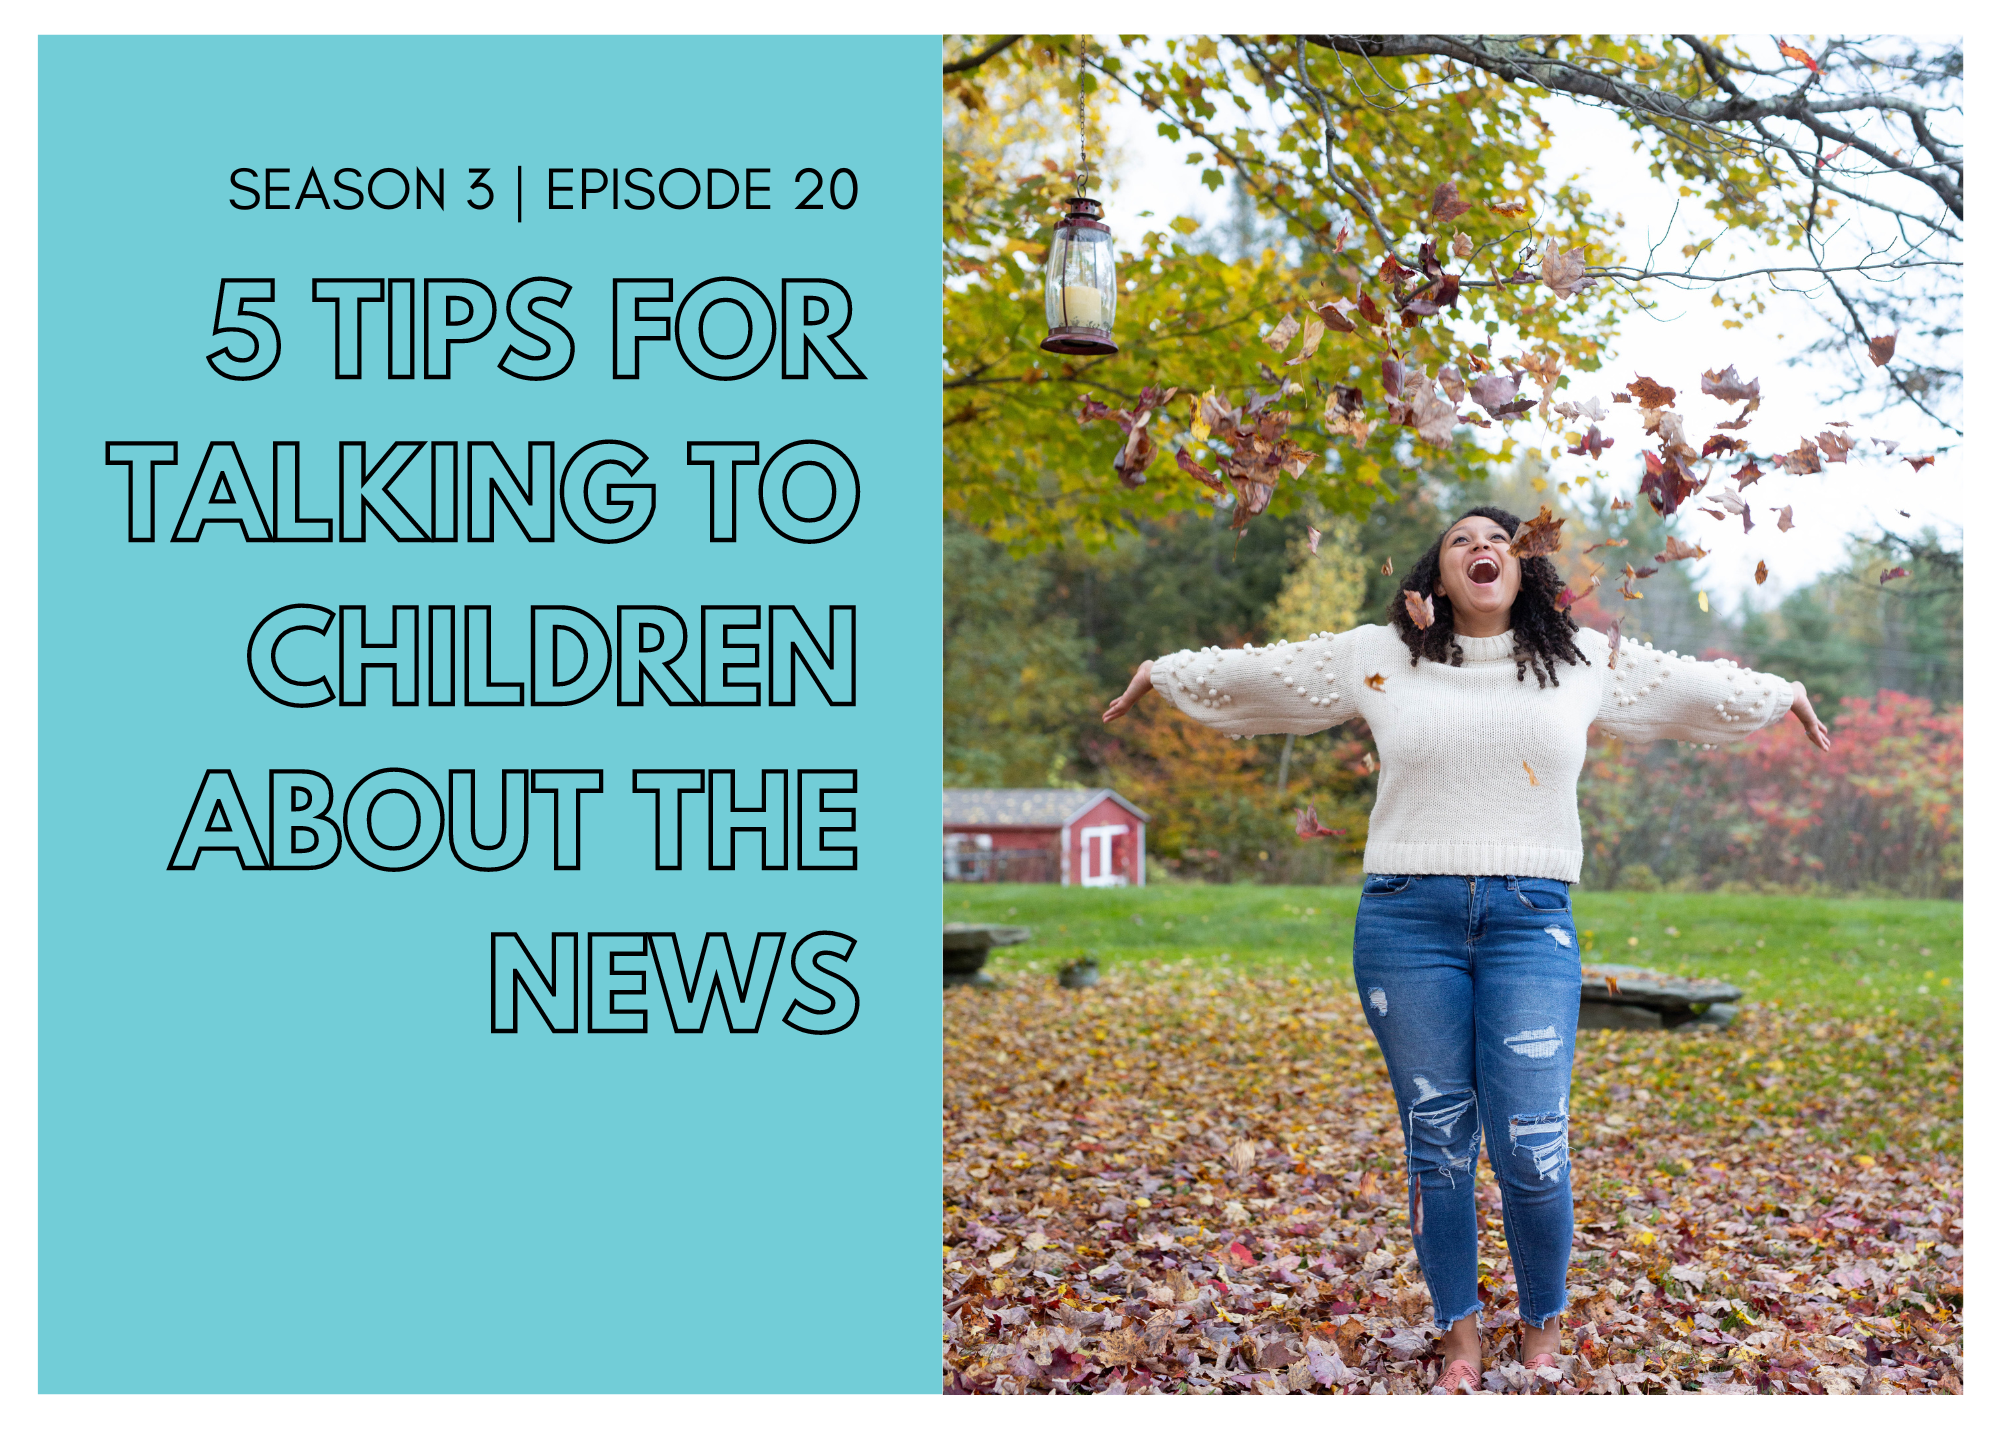 5 Tips for Talking to Children About the News